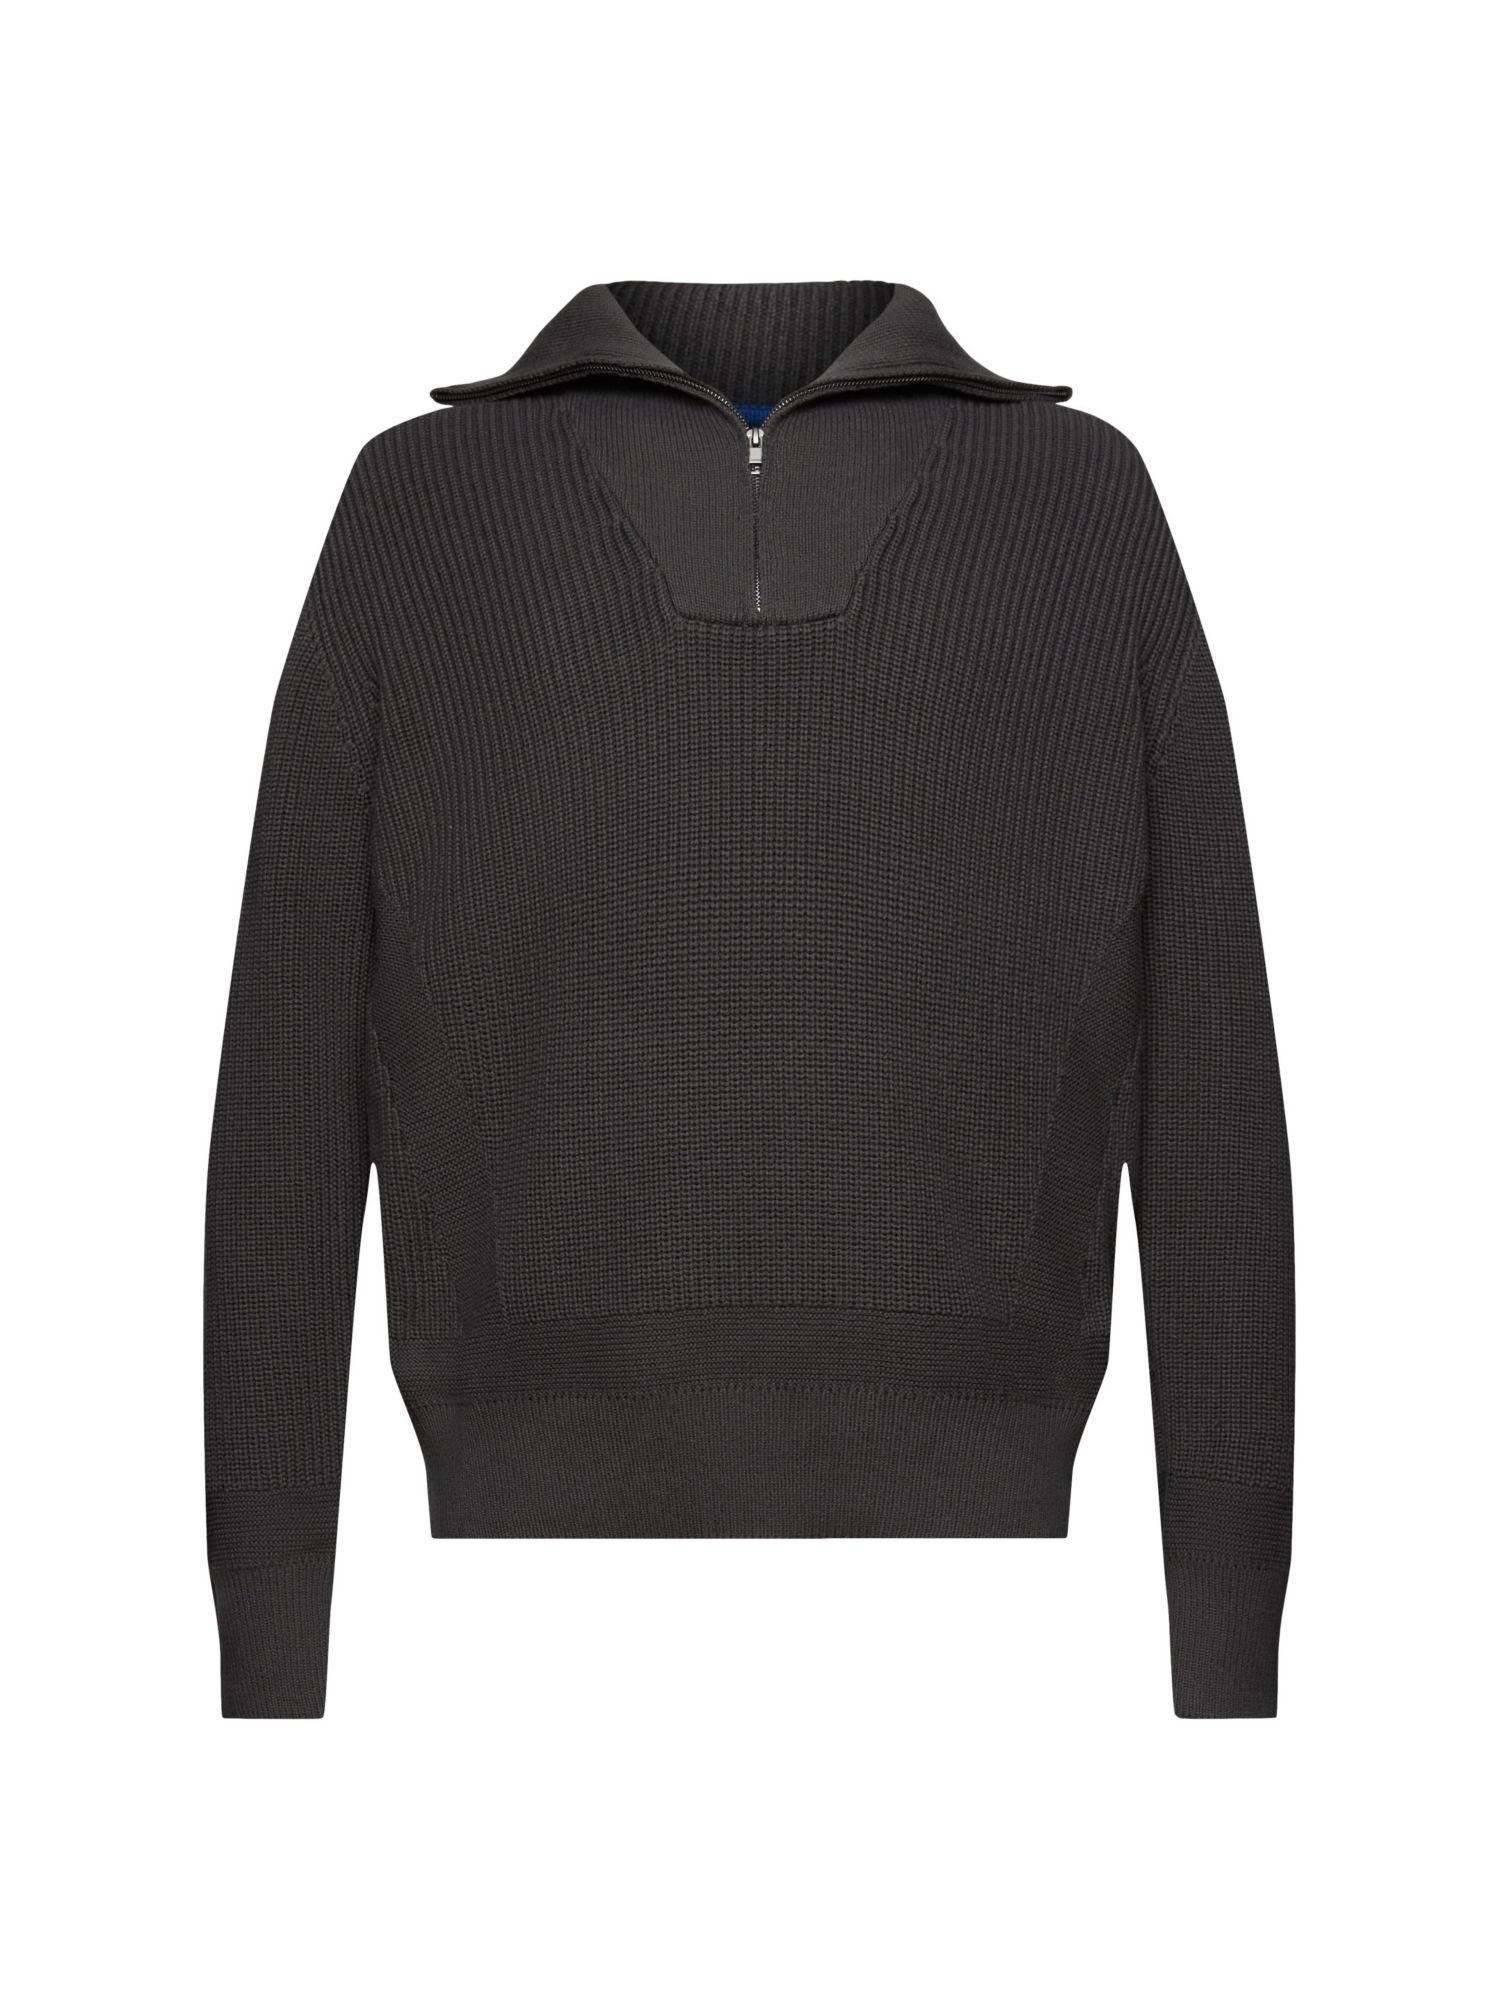 Troyer-Style Esprit Pullover im Troyer